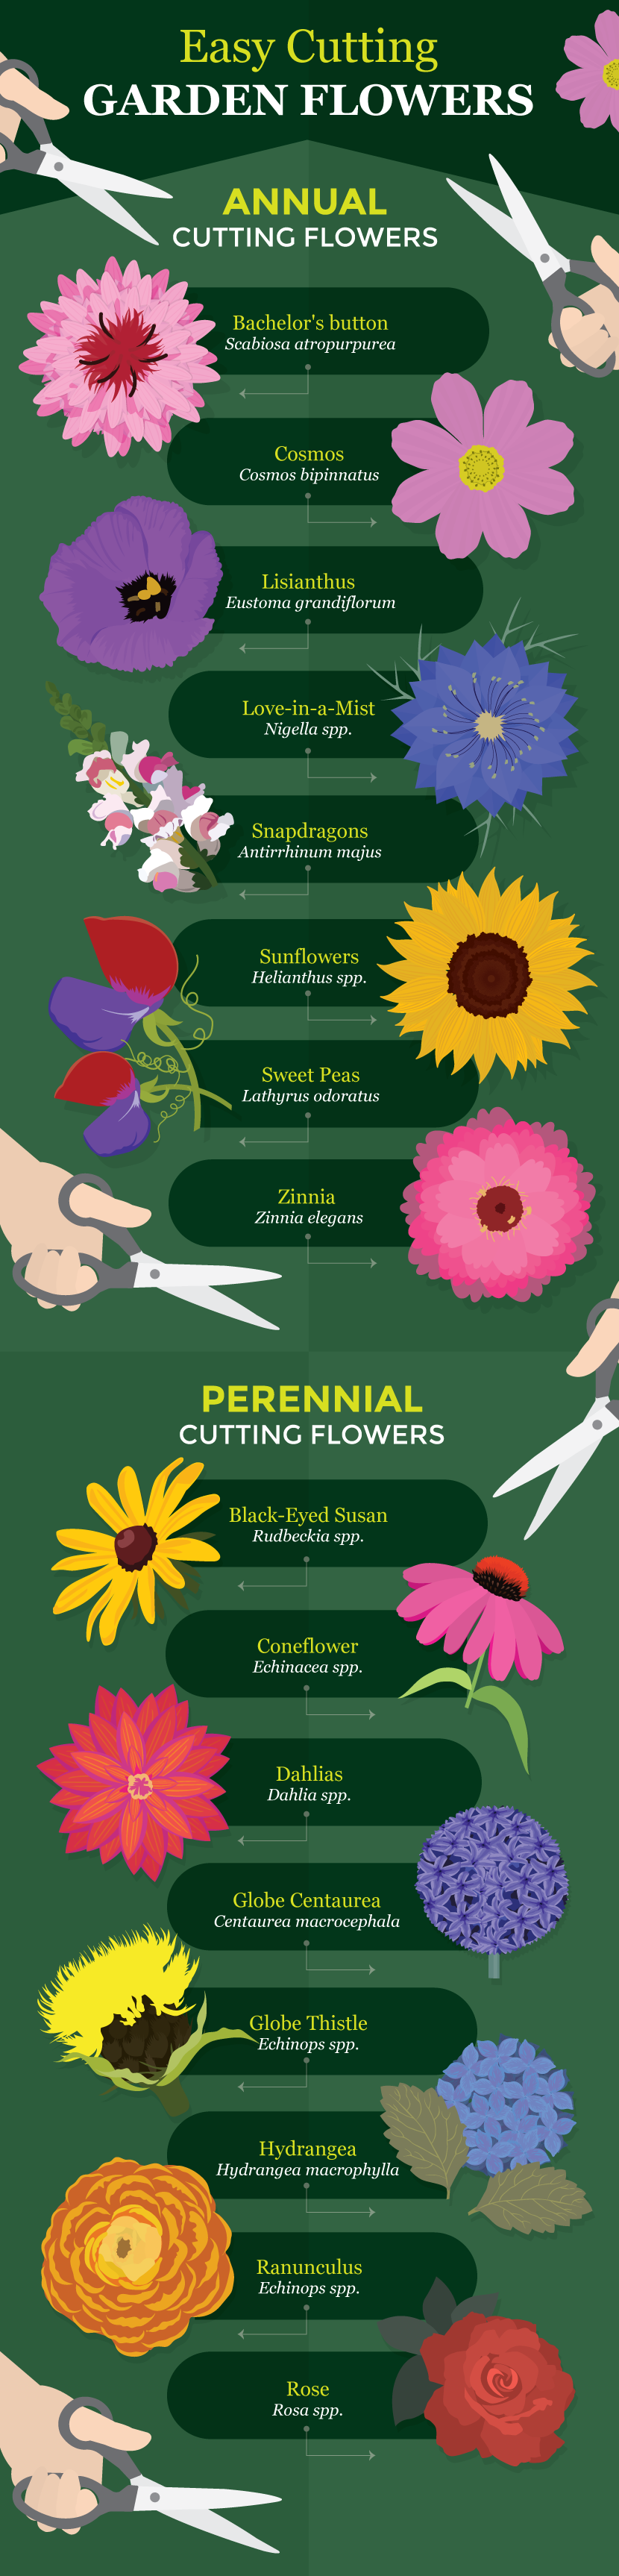 Easy Flowers For Cutting - A Guide to Growing Your Own Cutting Flowers